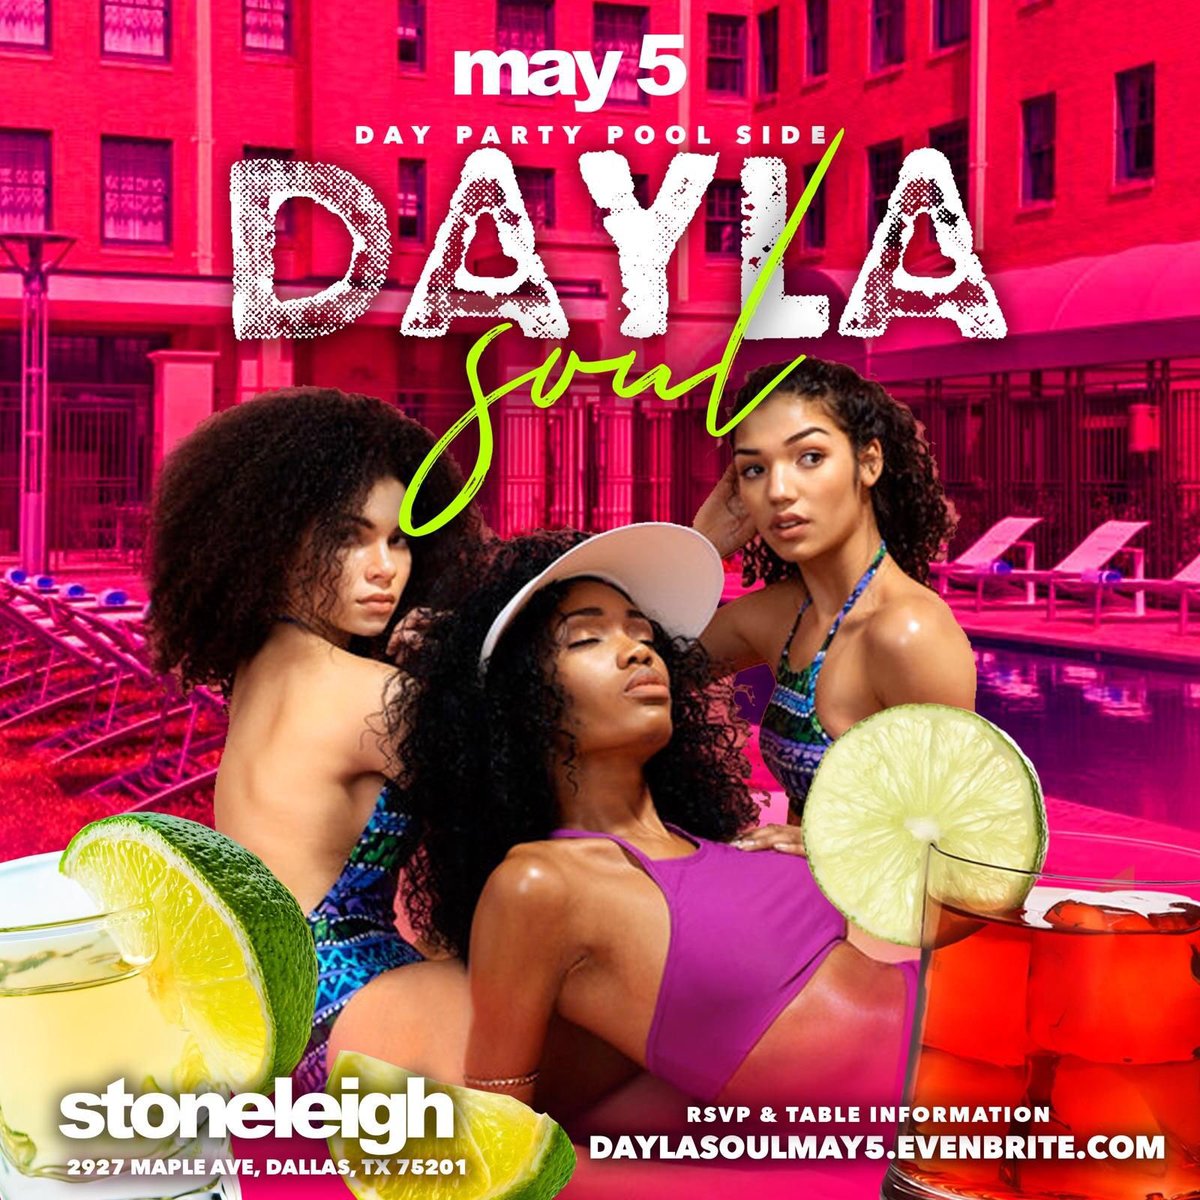 #CINCODEMAYO TODAY!!! #DAYlasoul DAY/Pool Party @ The Stoneleigh Hotel #UPTOWNDALLAS
3PM - 8PM. Stylish attire (NO ATHLETIC WEAR) Swimwear optional. There will be guest DJs + Food + #Hookah 

Let the madness begin!!!!!🇲🇽🍾